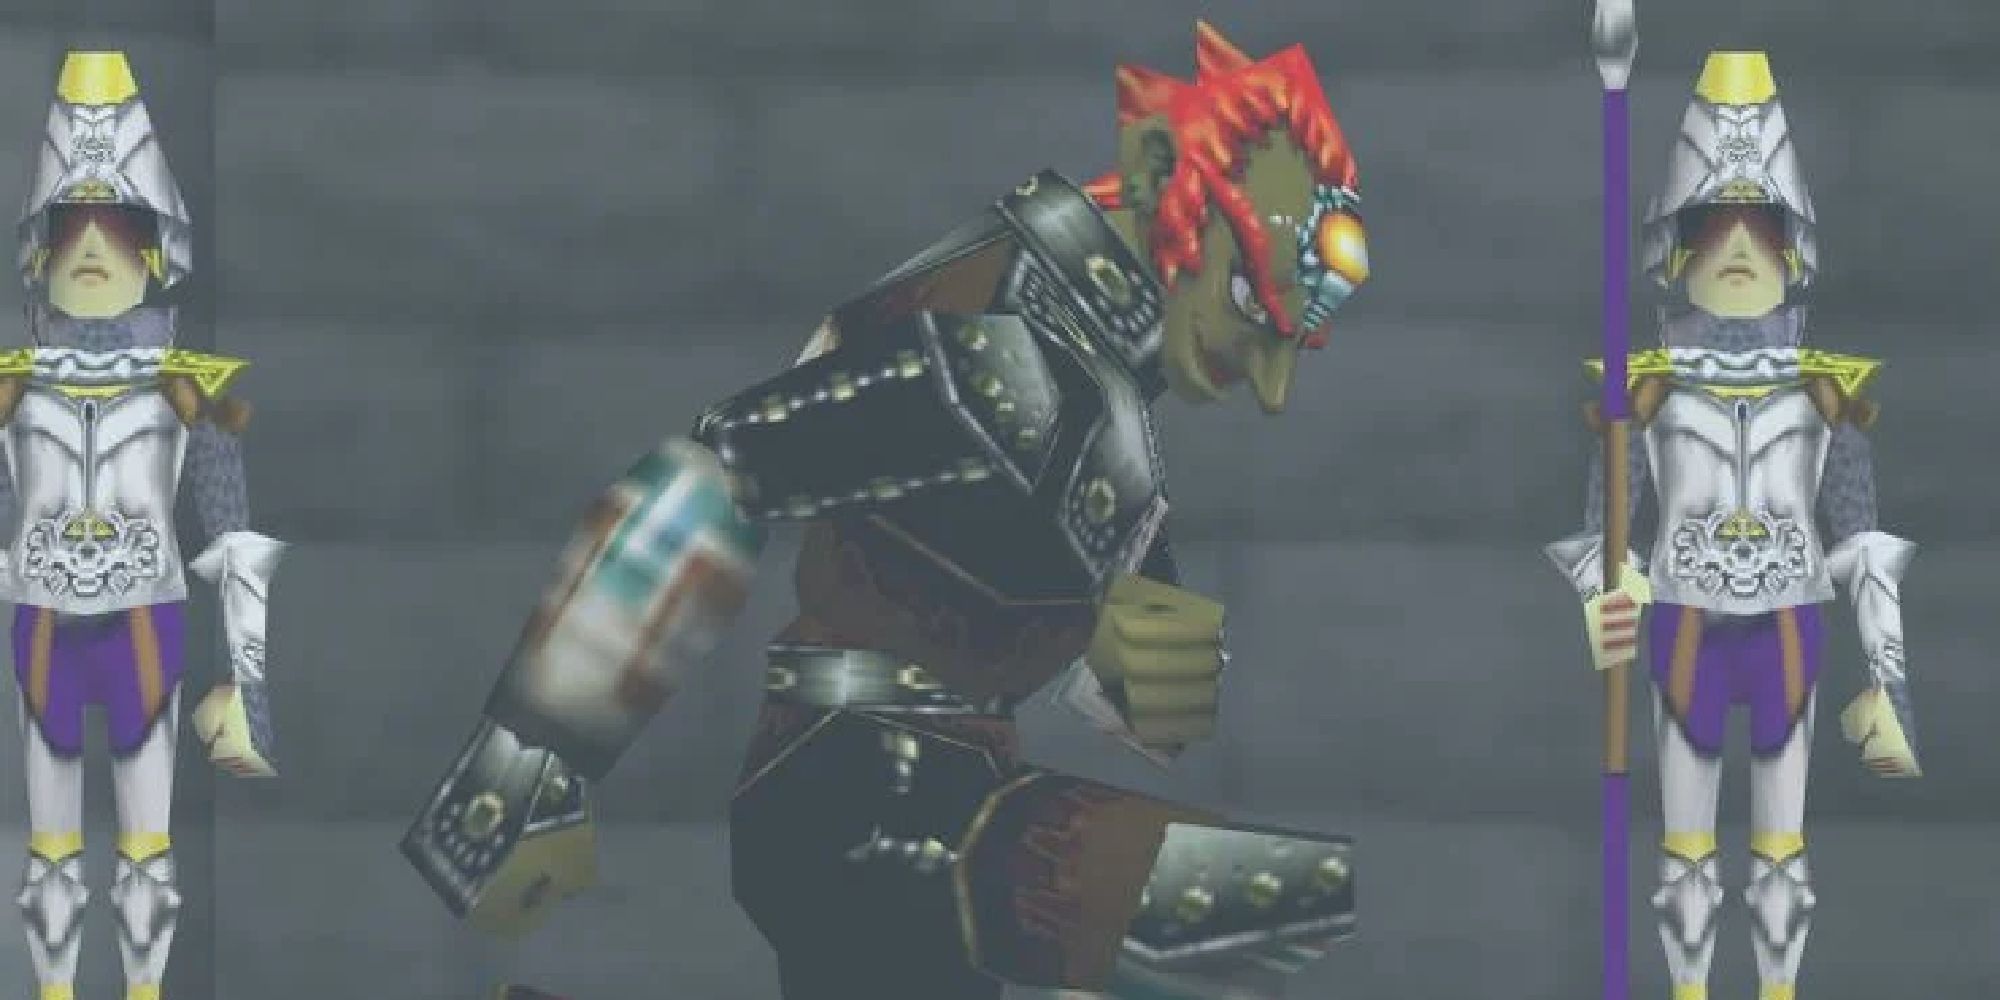 Ganondorf kneeling next to two Hylian guards in Ocarina of Time